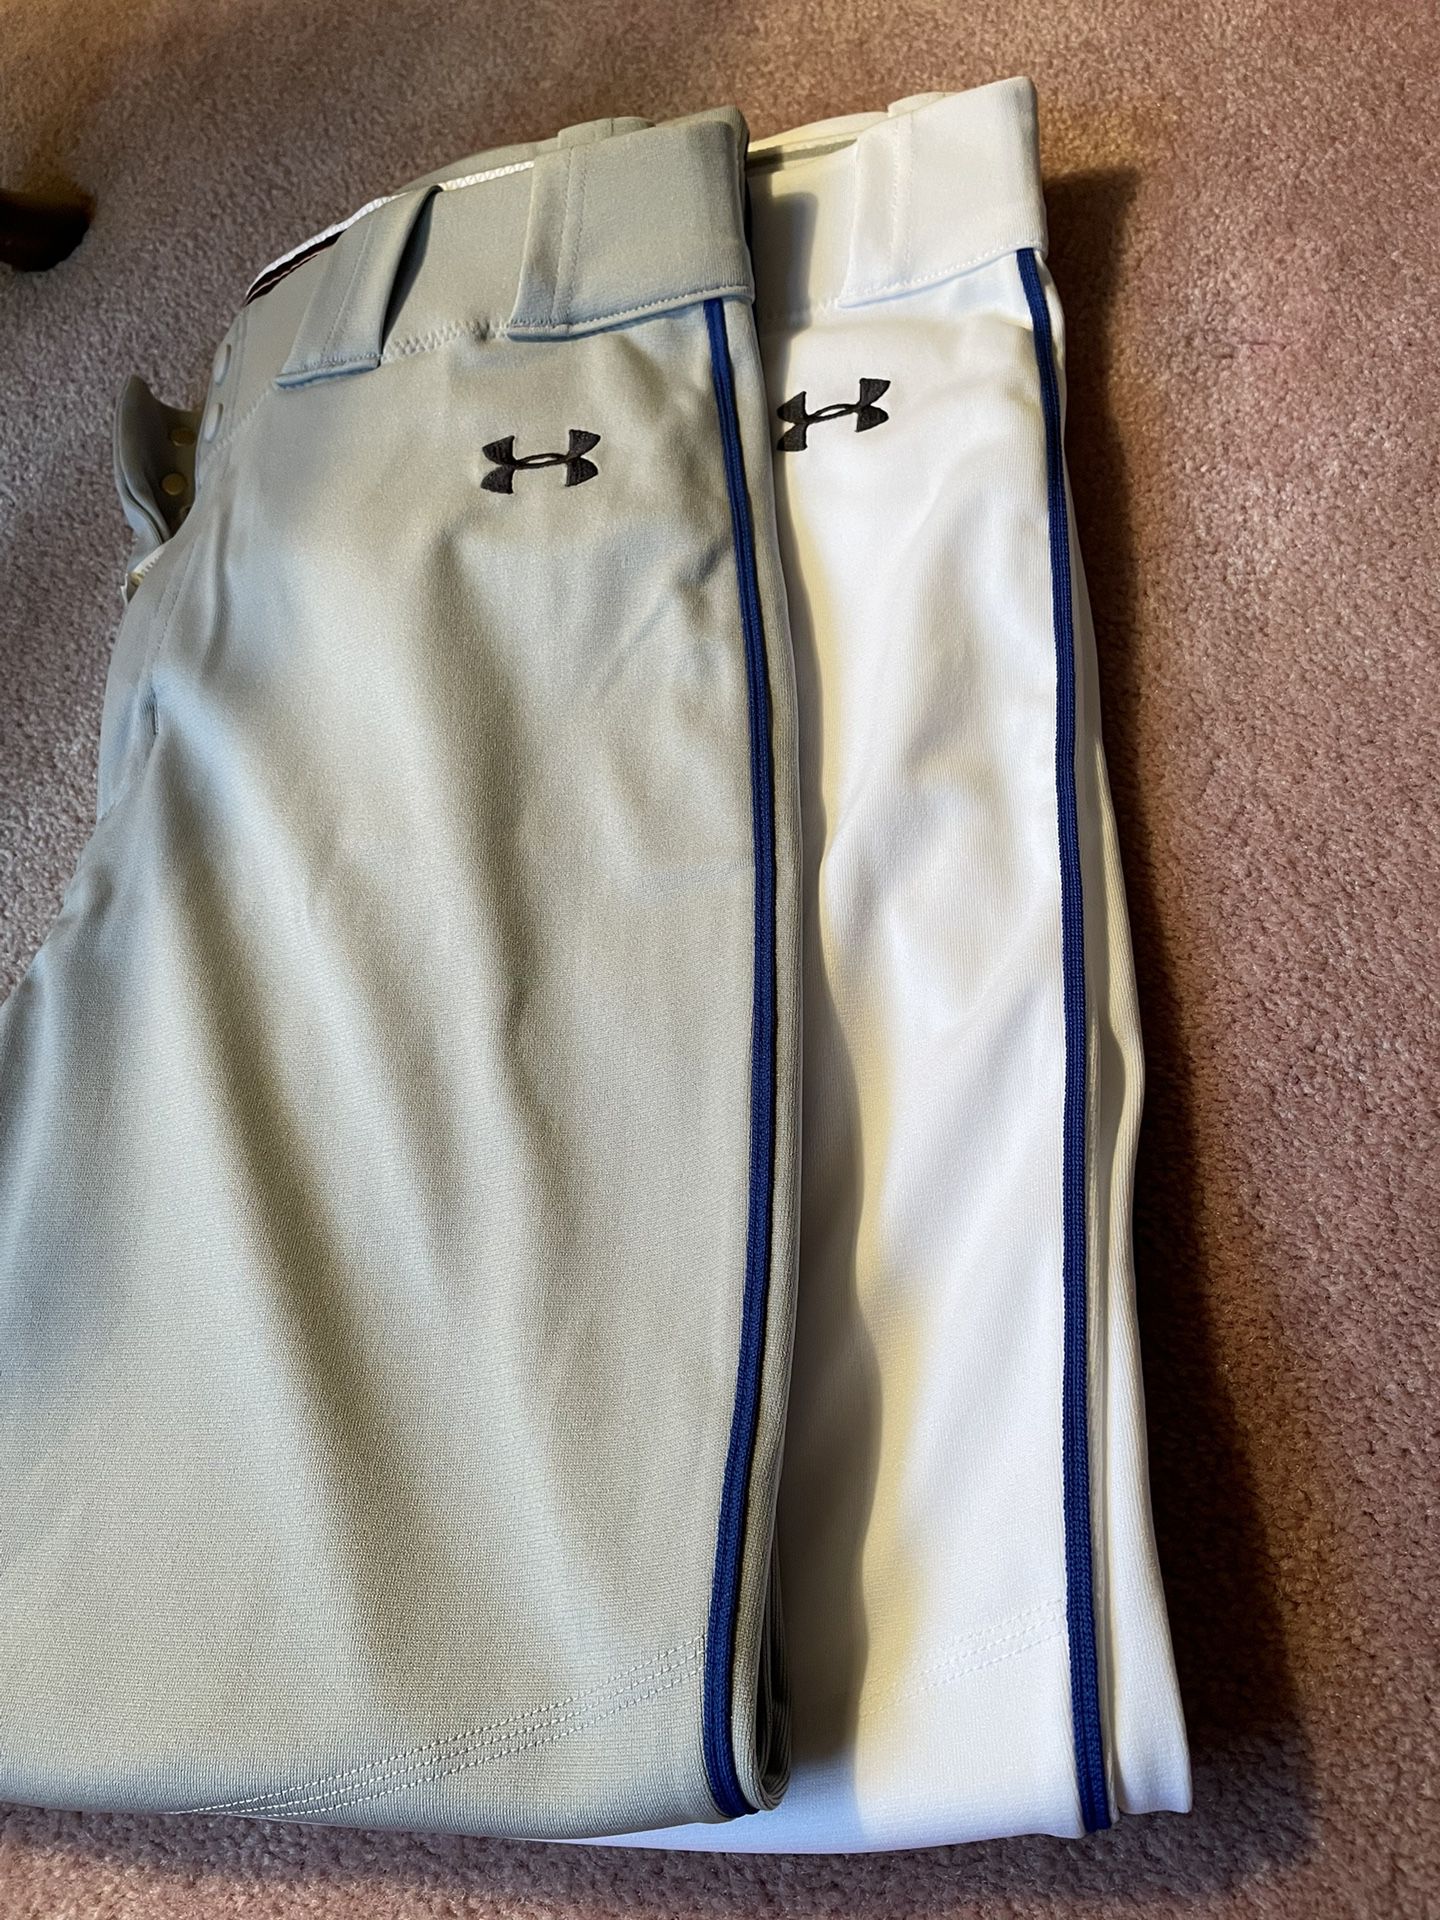 Under Armour Mens Piped Baseball Pants (2 Pairs)